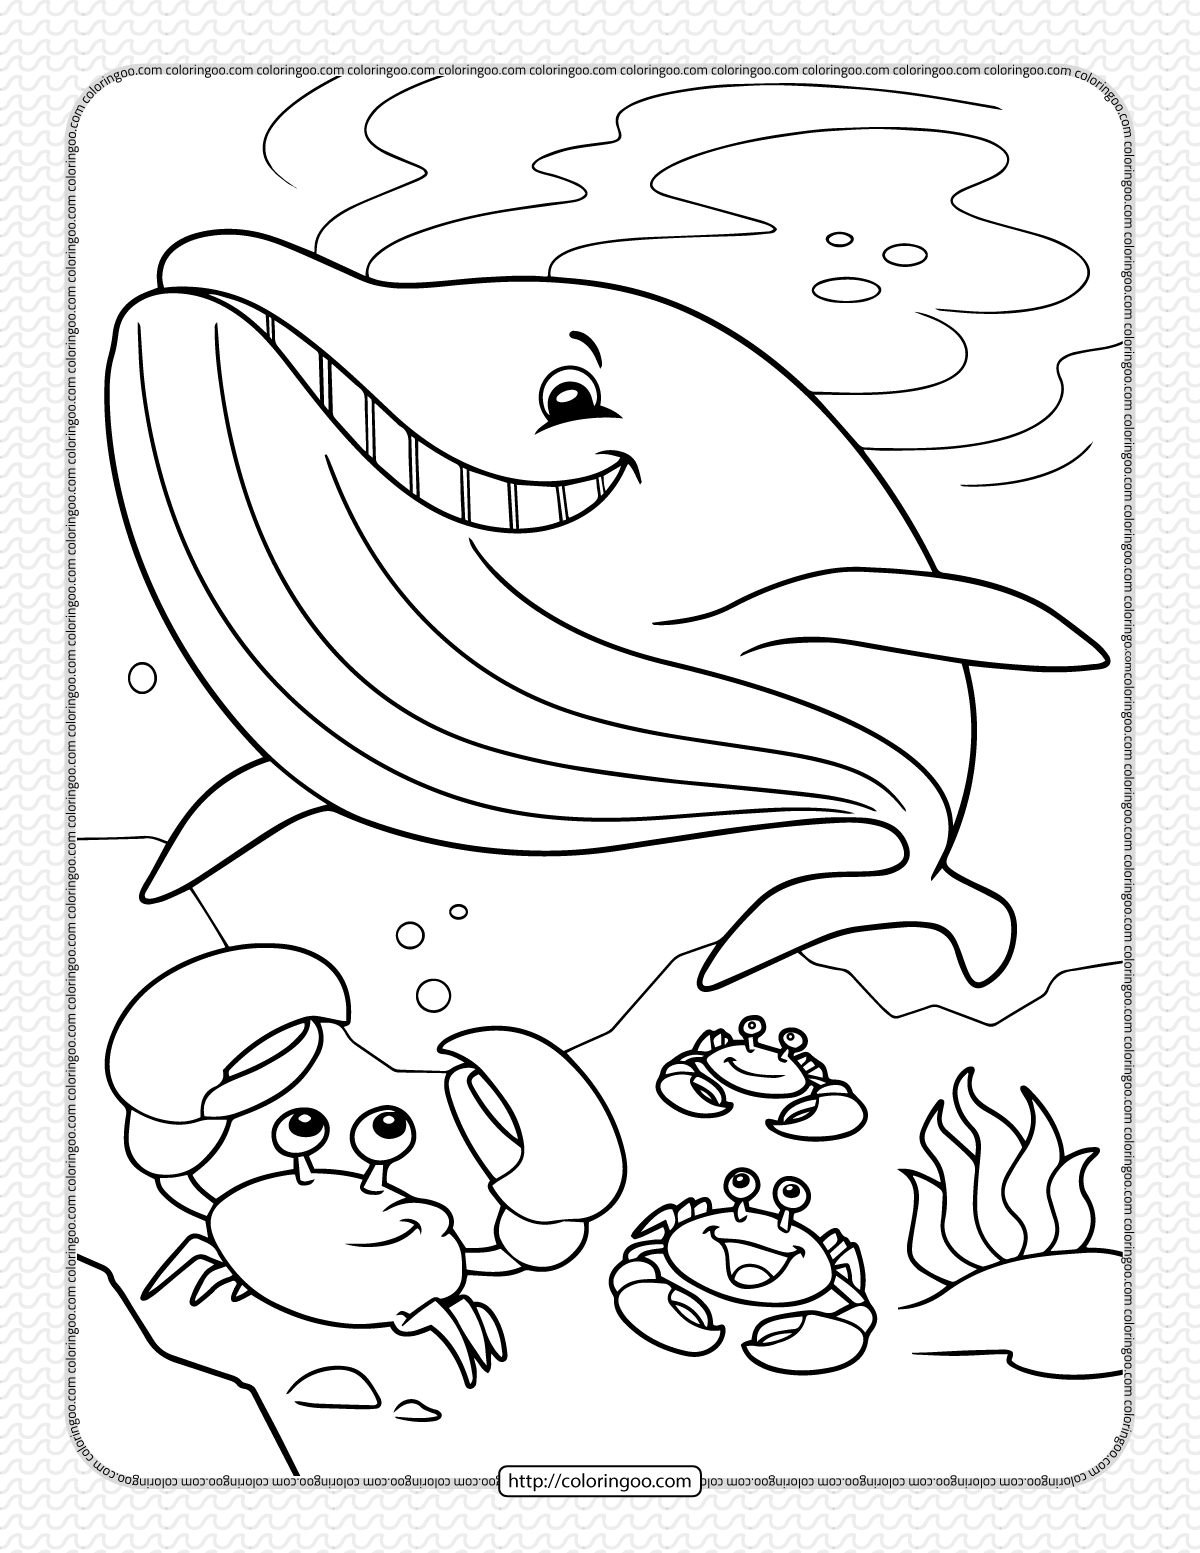 whale and crabs coloring page